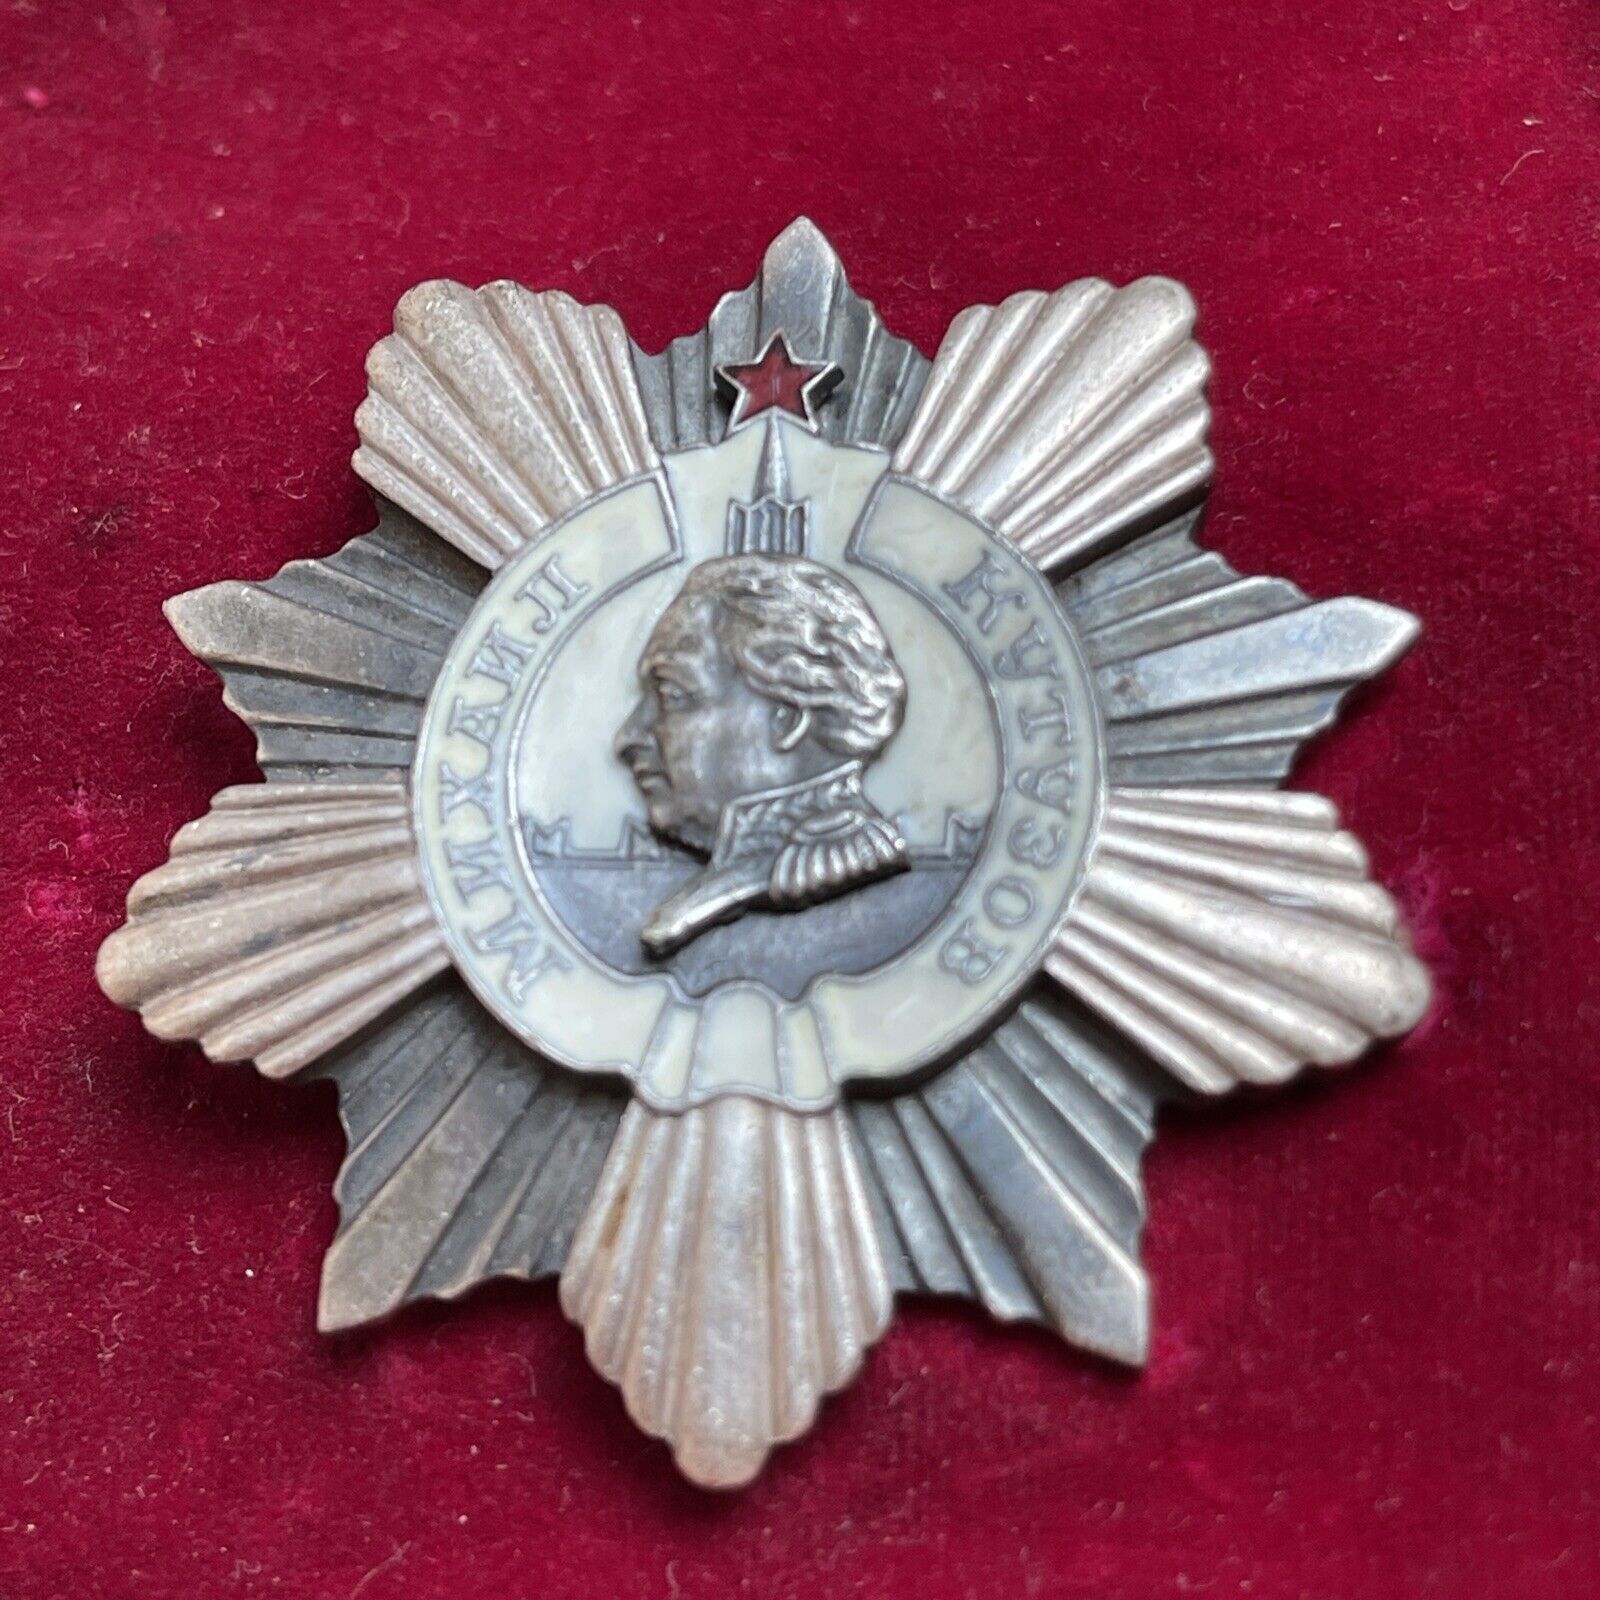 USSR SOVIET RUSSIA ORDER OF MICHAIL KUTUZOV 2nd CLASS HIGH END OLD COPY 